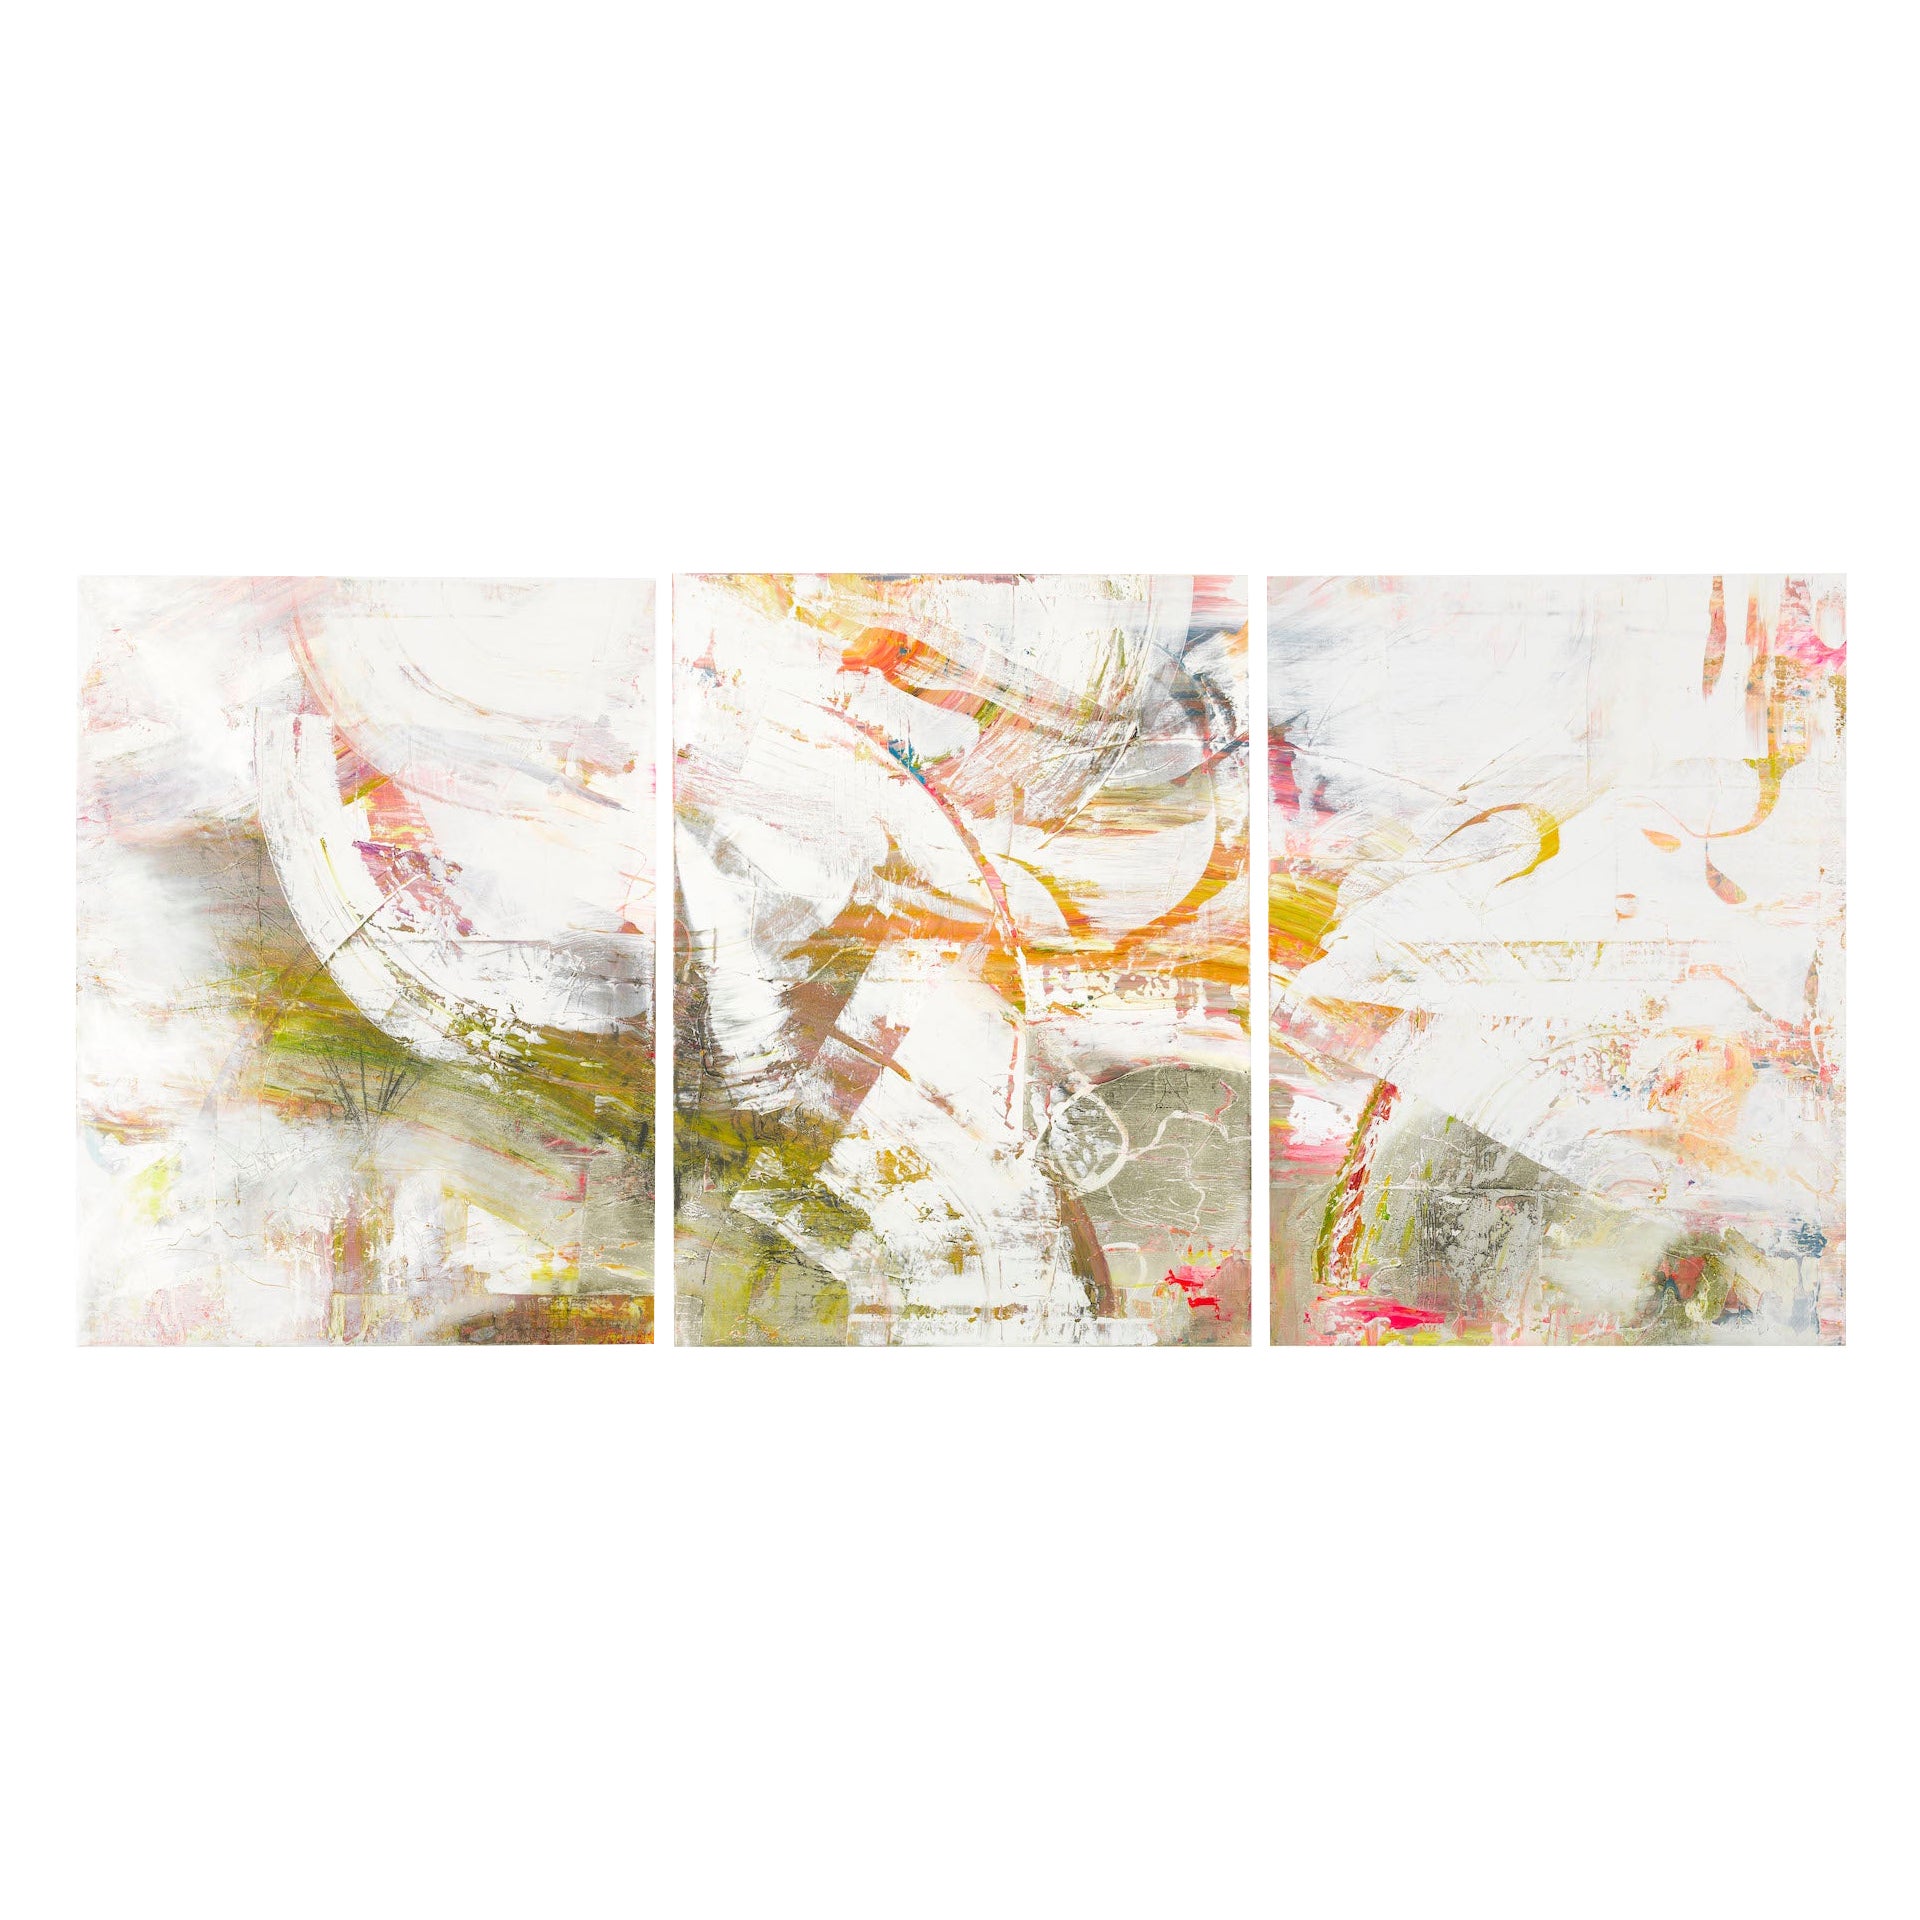 Huge contemporary impressionistic triptych with flashes of color on milky ground